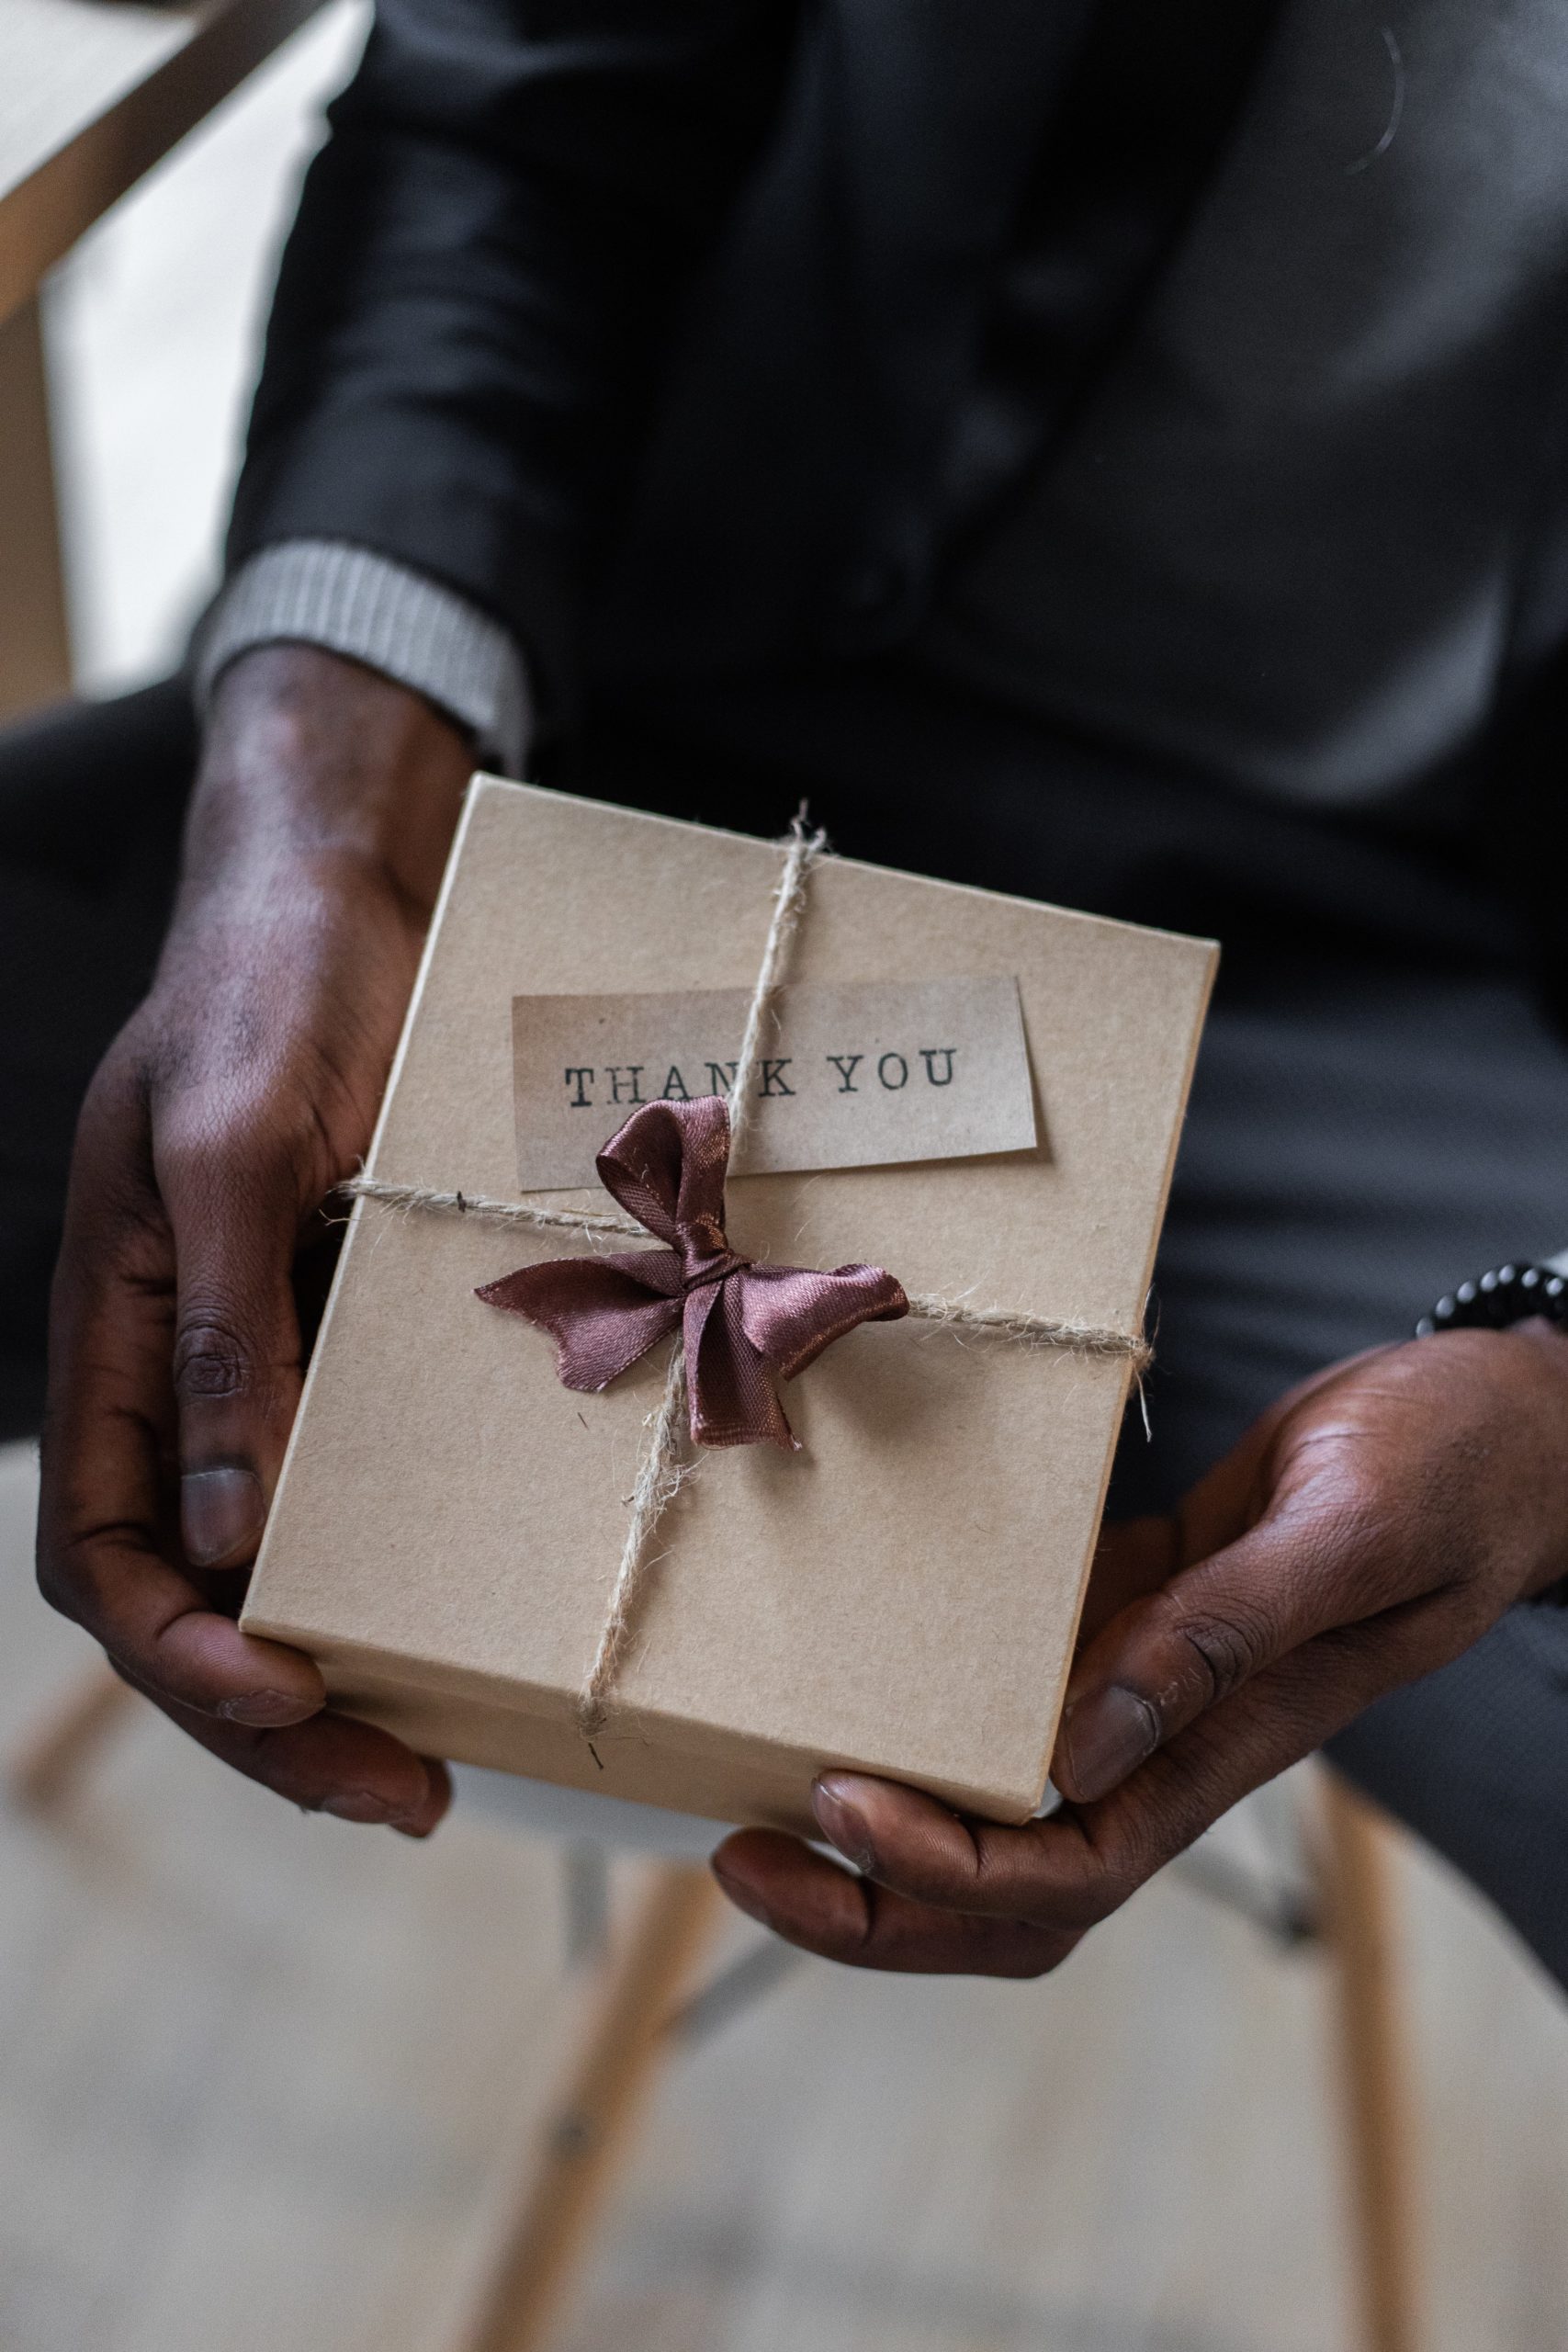 A person offering a hand-wrapped gift box with a thank you note to show member appreciation.